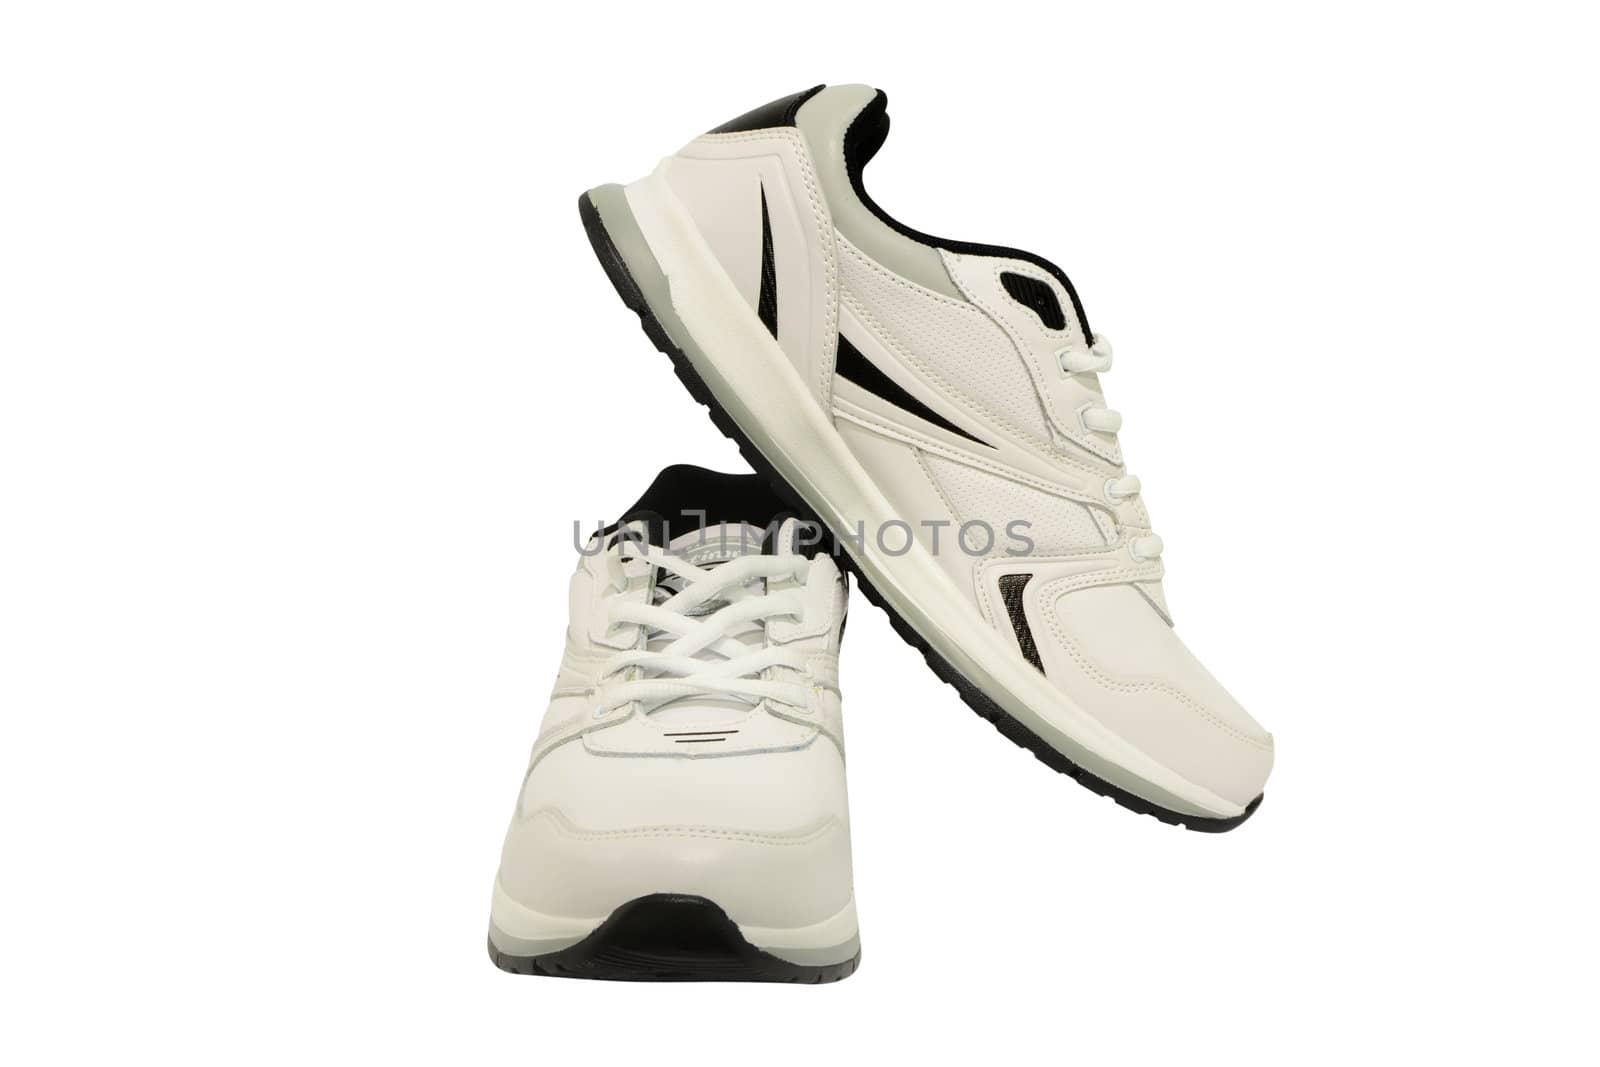 Man's shoes  on white background